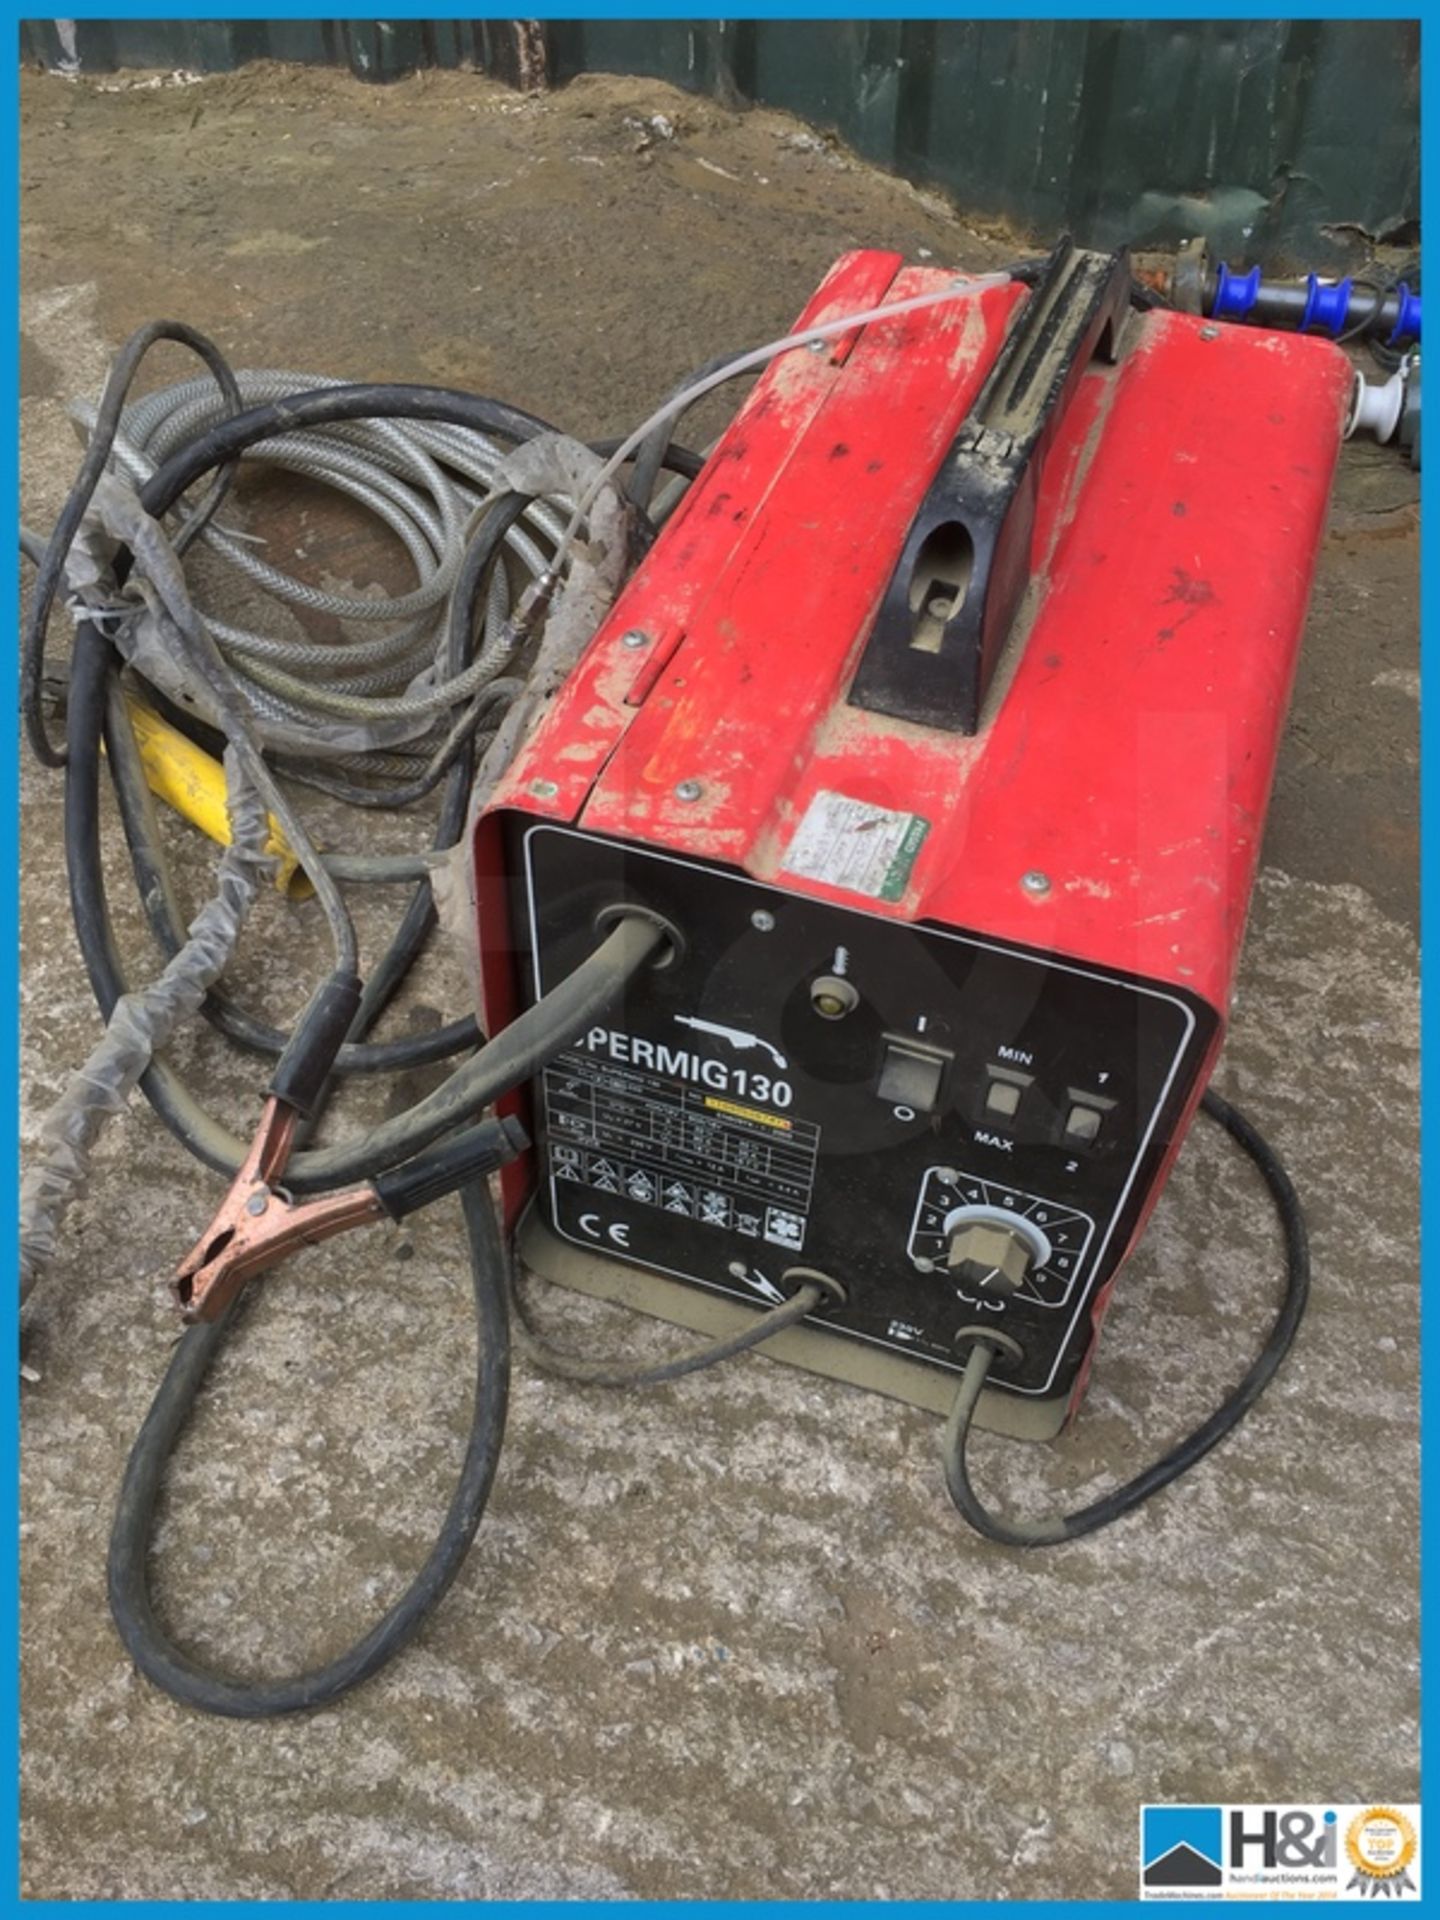 Sealy SuperMig 130 single phase mig welder in good condition NO VAT ON THIS ITEM EXCEPT ON BUYERS